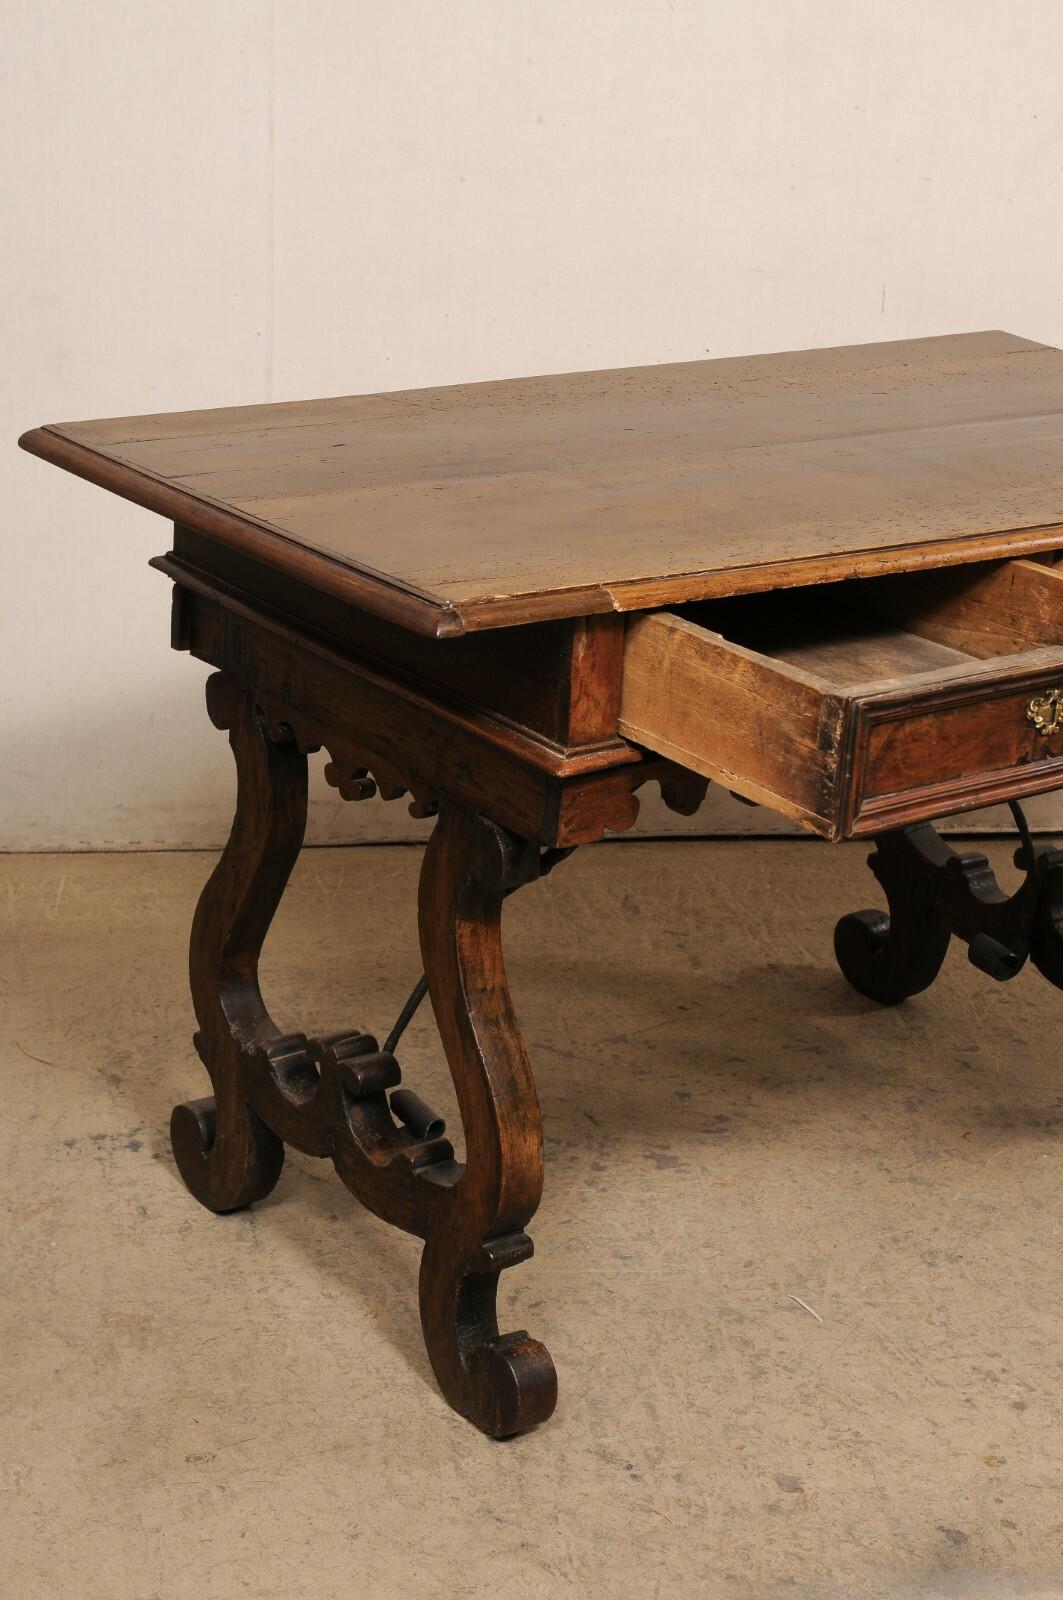 Late 18th Century Italian Fratino Table w/Drawers & Forged Iron Stretcher In Good Condition For Sale In Atlanta, GA